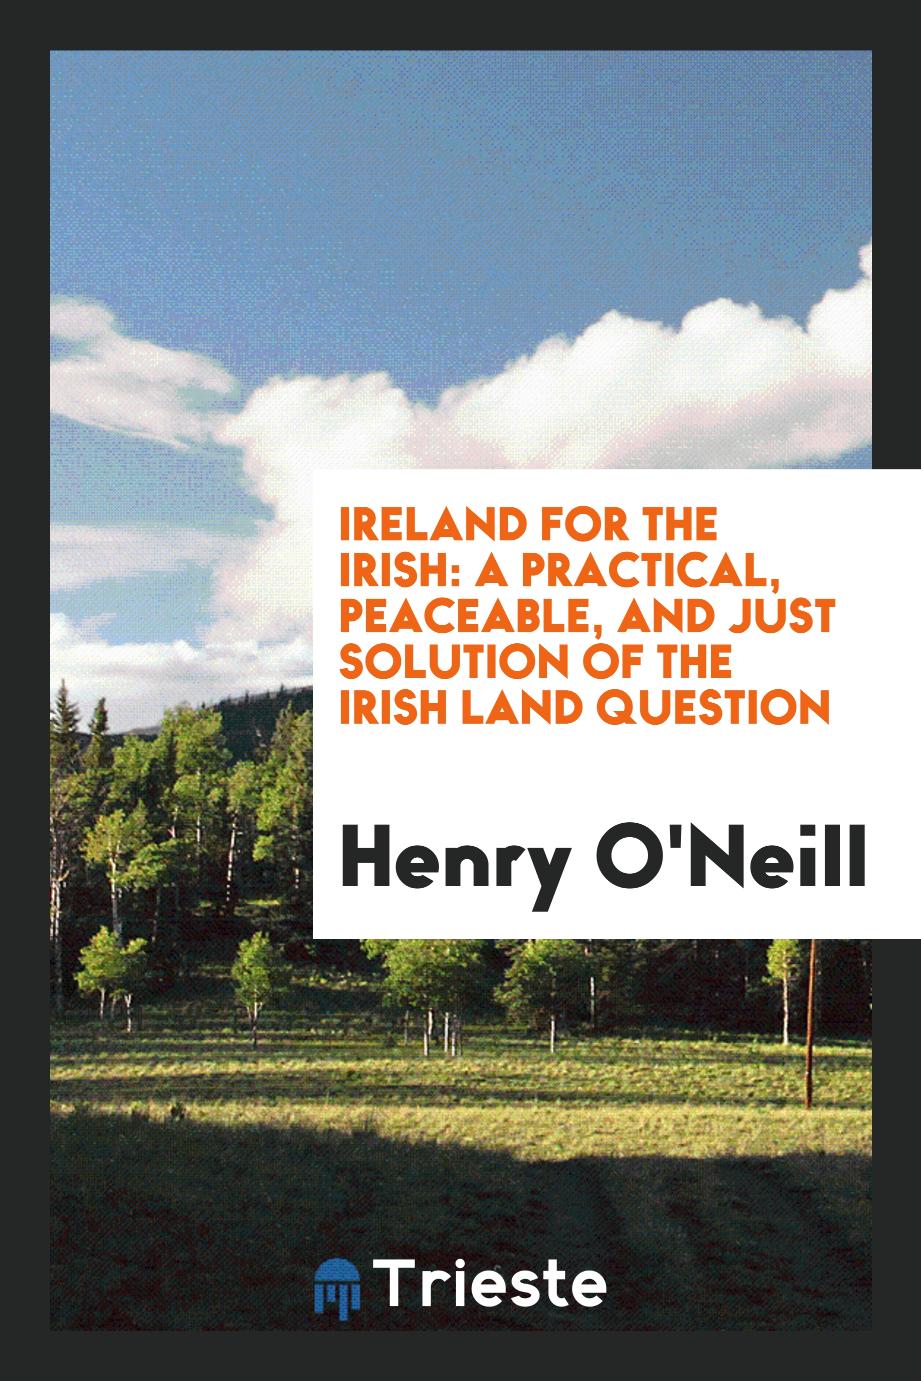 Ireland for the Irish: A Practical, Peaceable, and Just Solution of the Irish Land Question